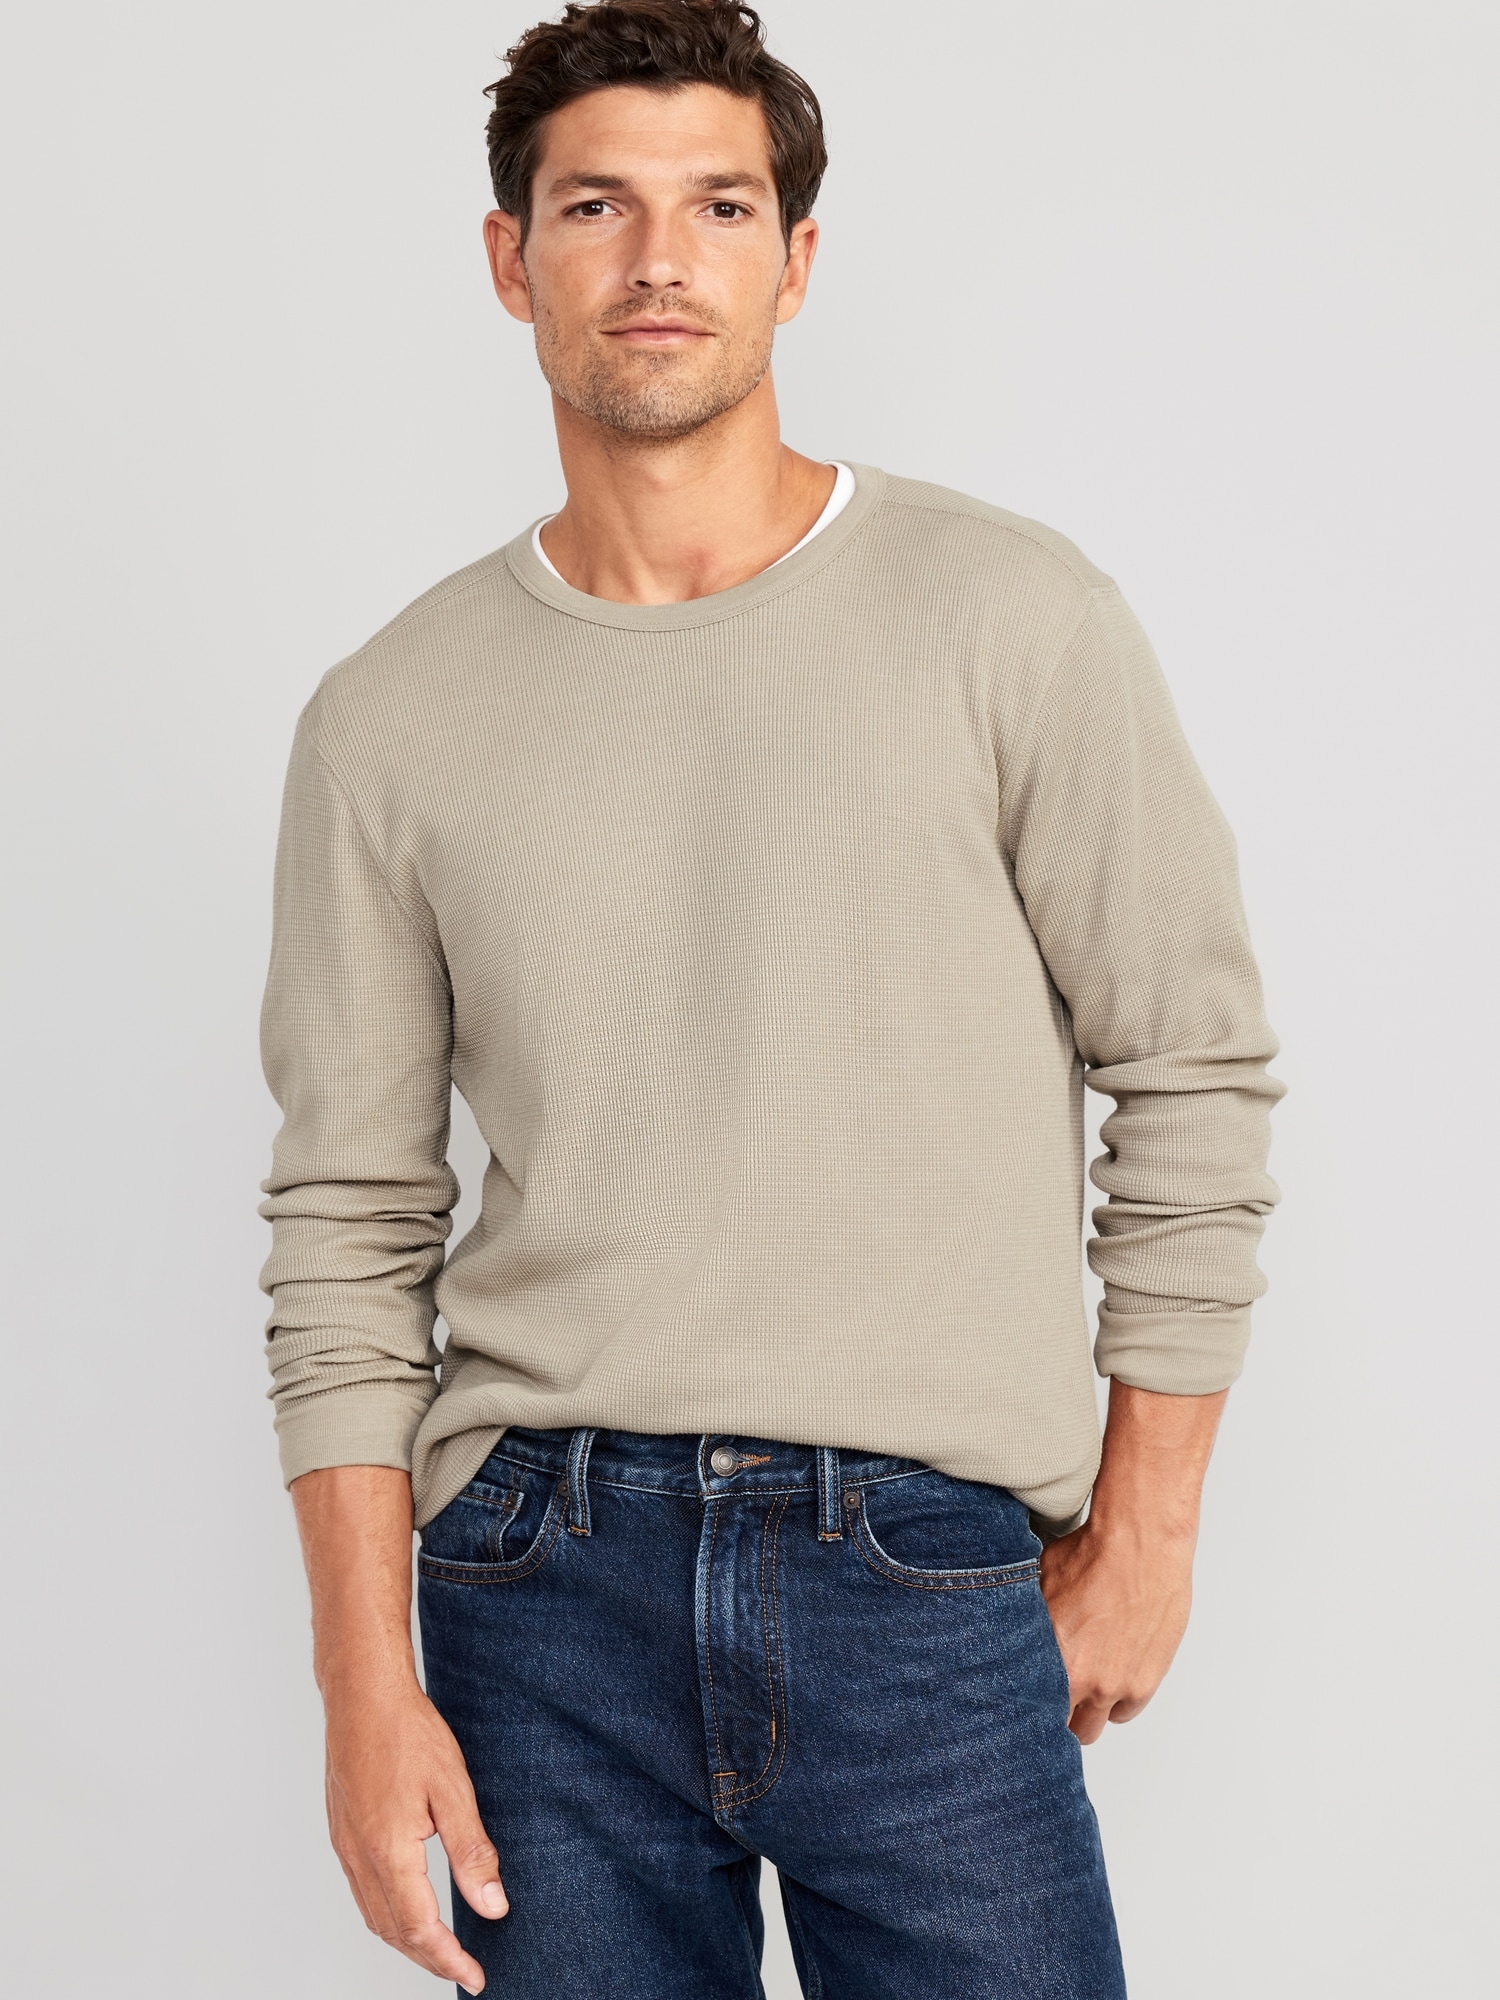 Long-Sleeve Built-In Flex Waffle-Knit T-Shirt | Old Navy